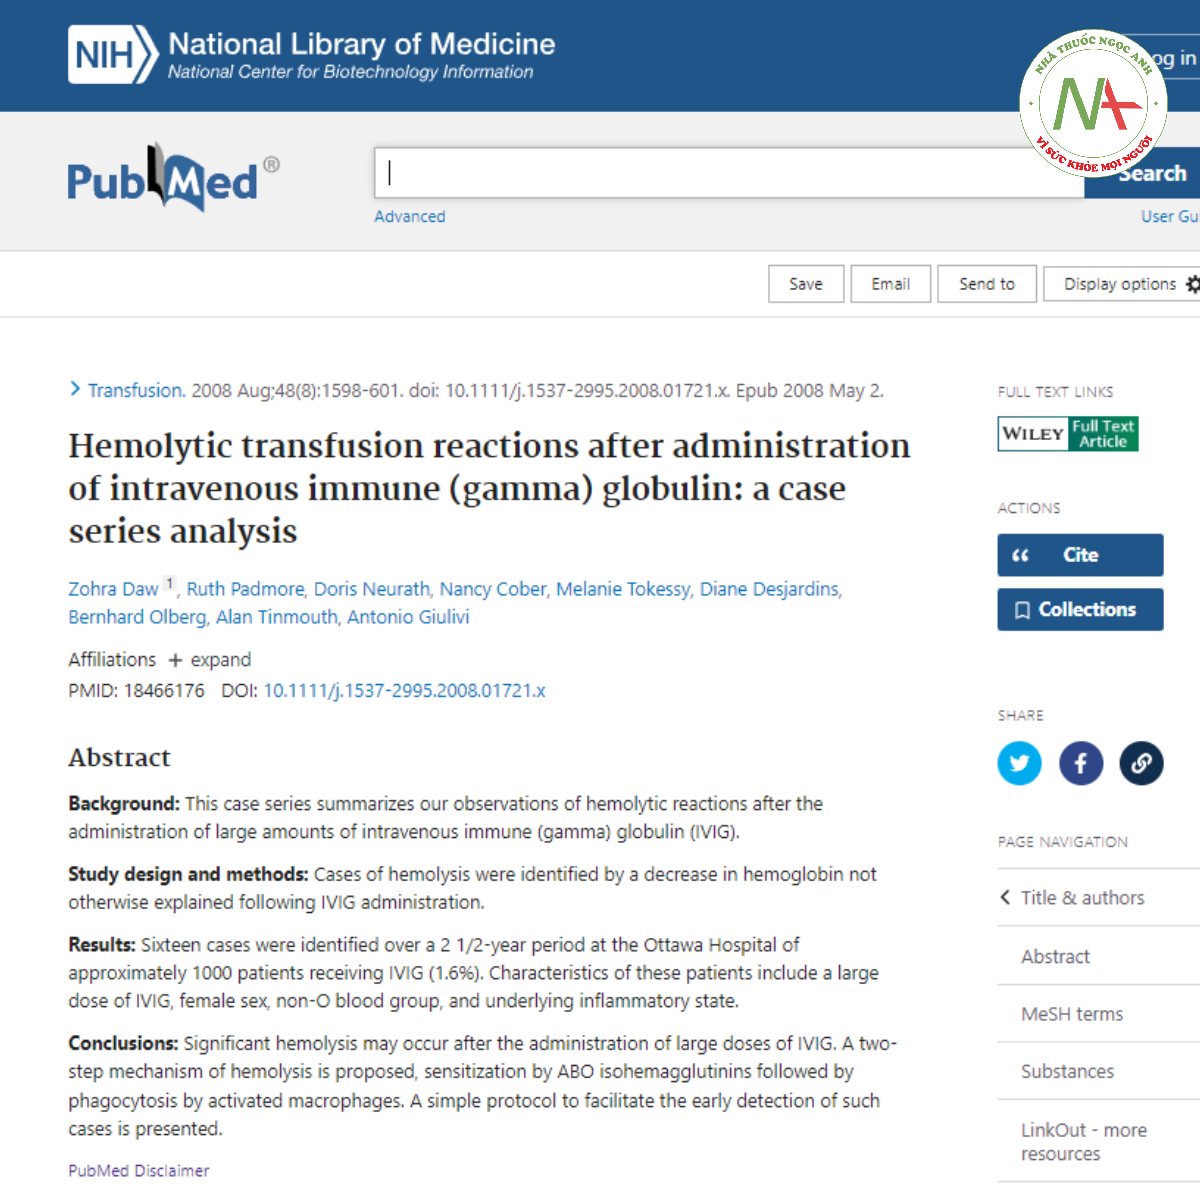 Hemolytic transfusion reactions after administration of intravenous immune (gamma) globulin_ a case series analysis